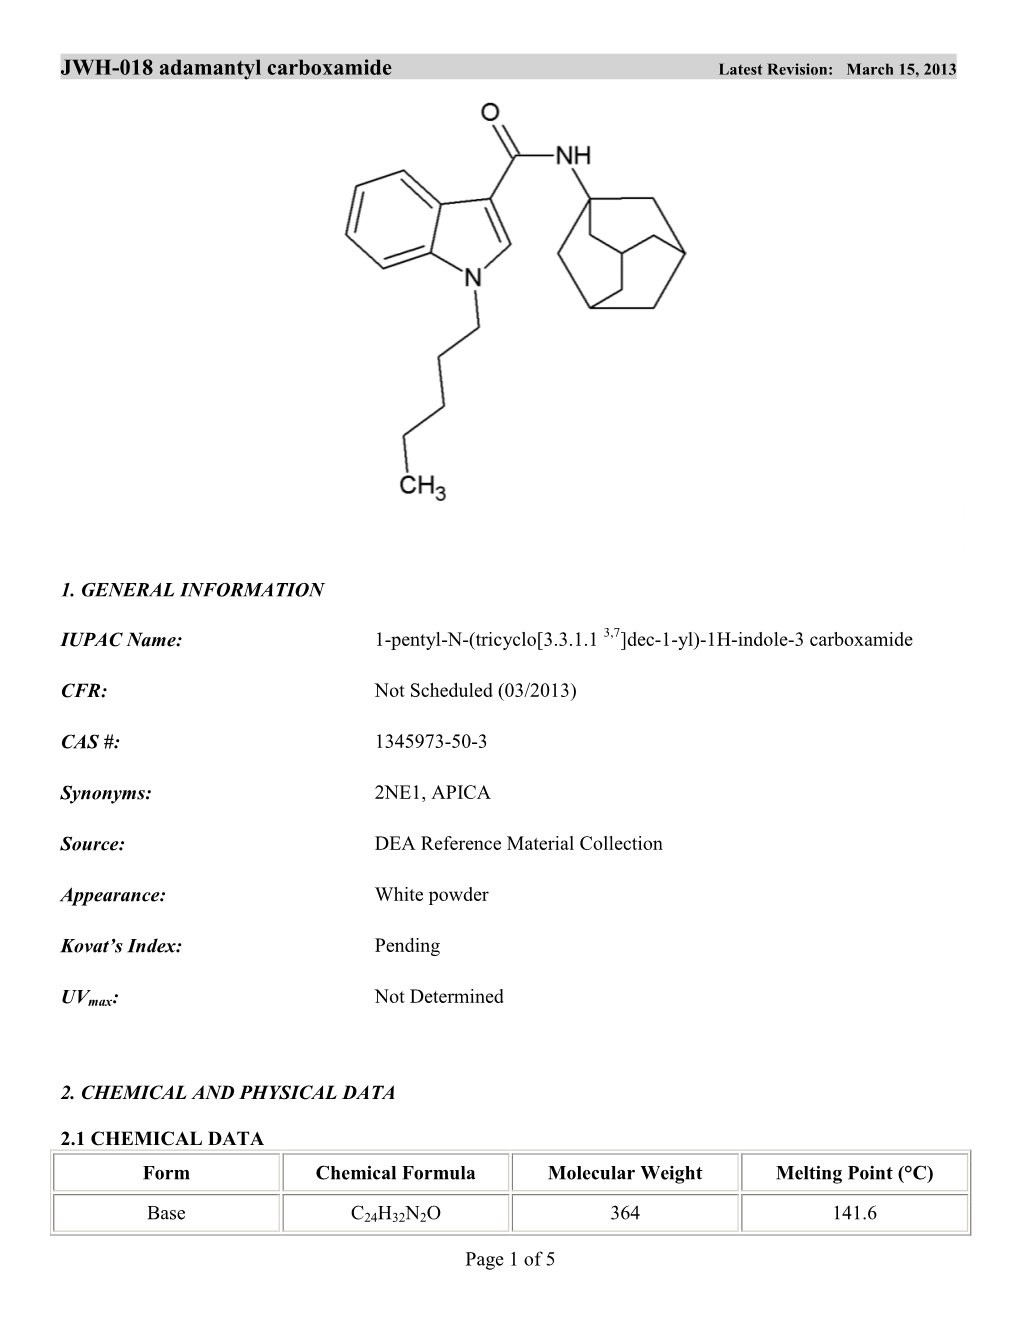 JWH-018 Adamantyl Carboxamide Latest Revision: March 15, 2013